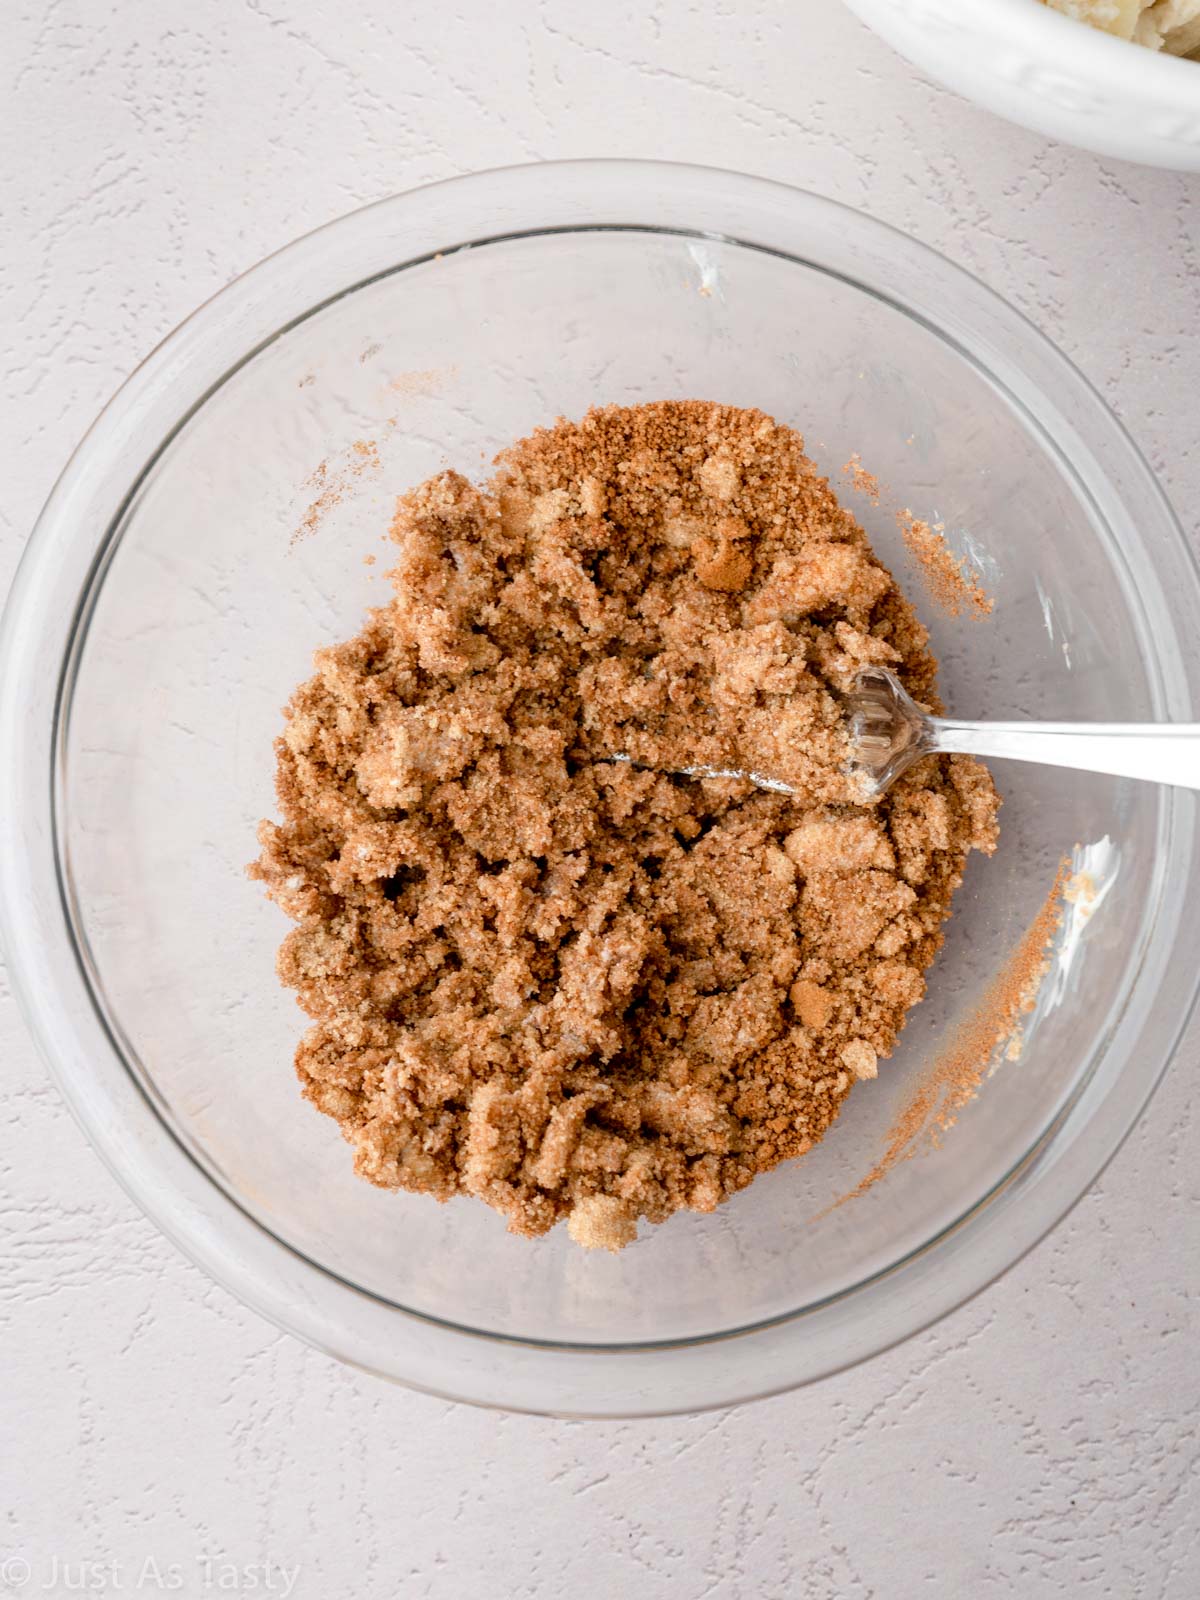 Cinnamon crumble topping in a bowl.